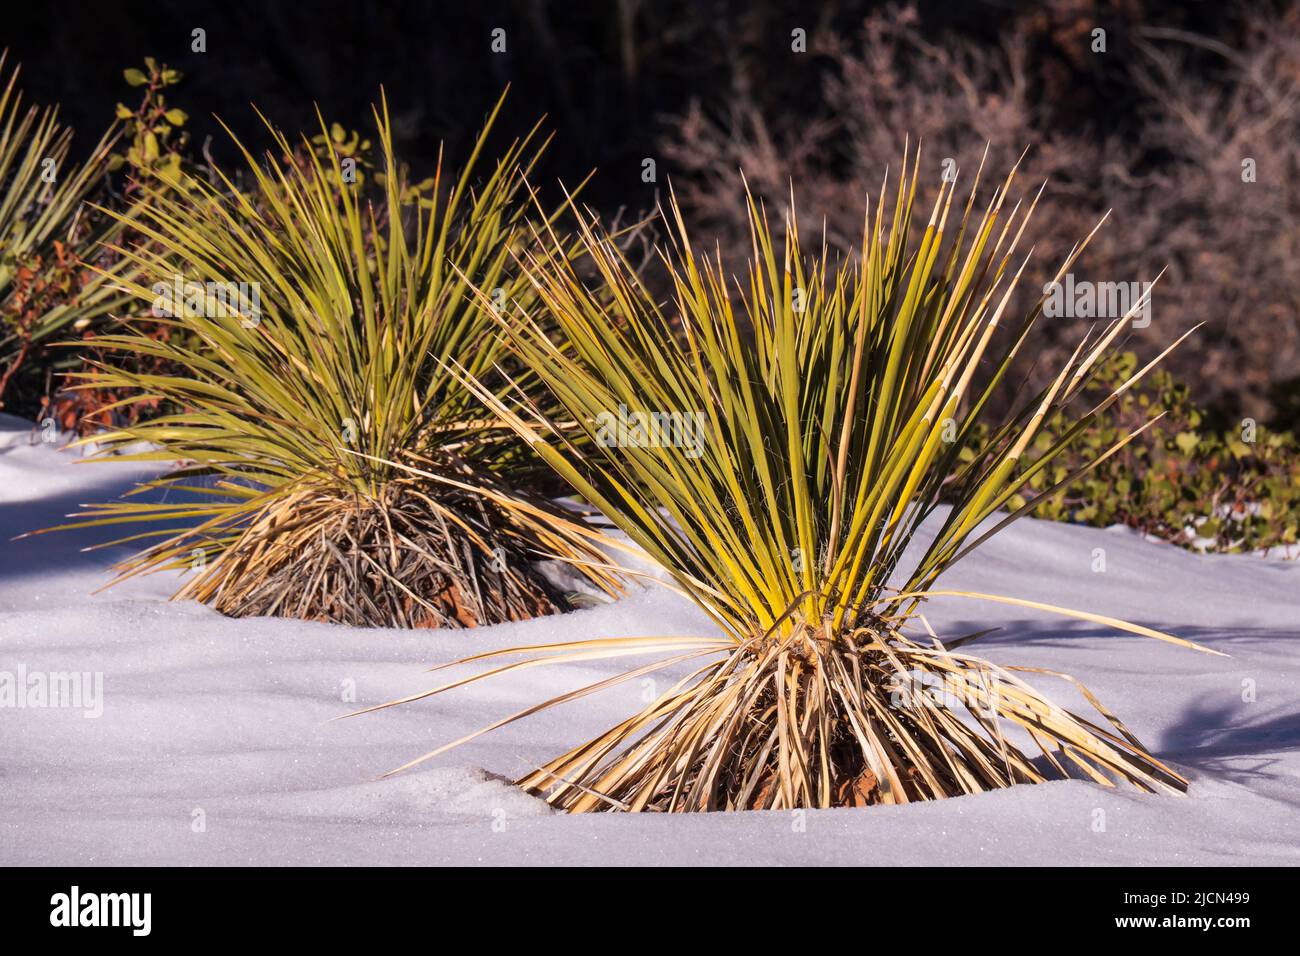 Yucca in snow along Zion-Mount Carmel Junction Highway, winter, Zion National Park, Utah. Stock Photo